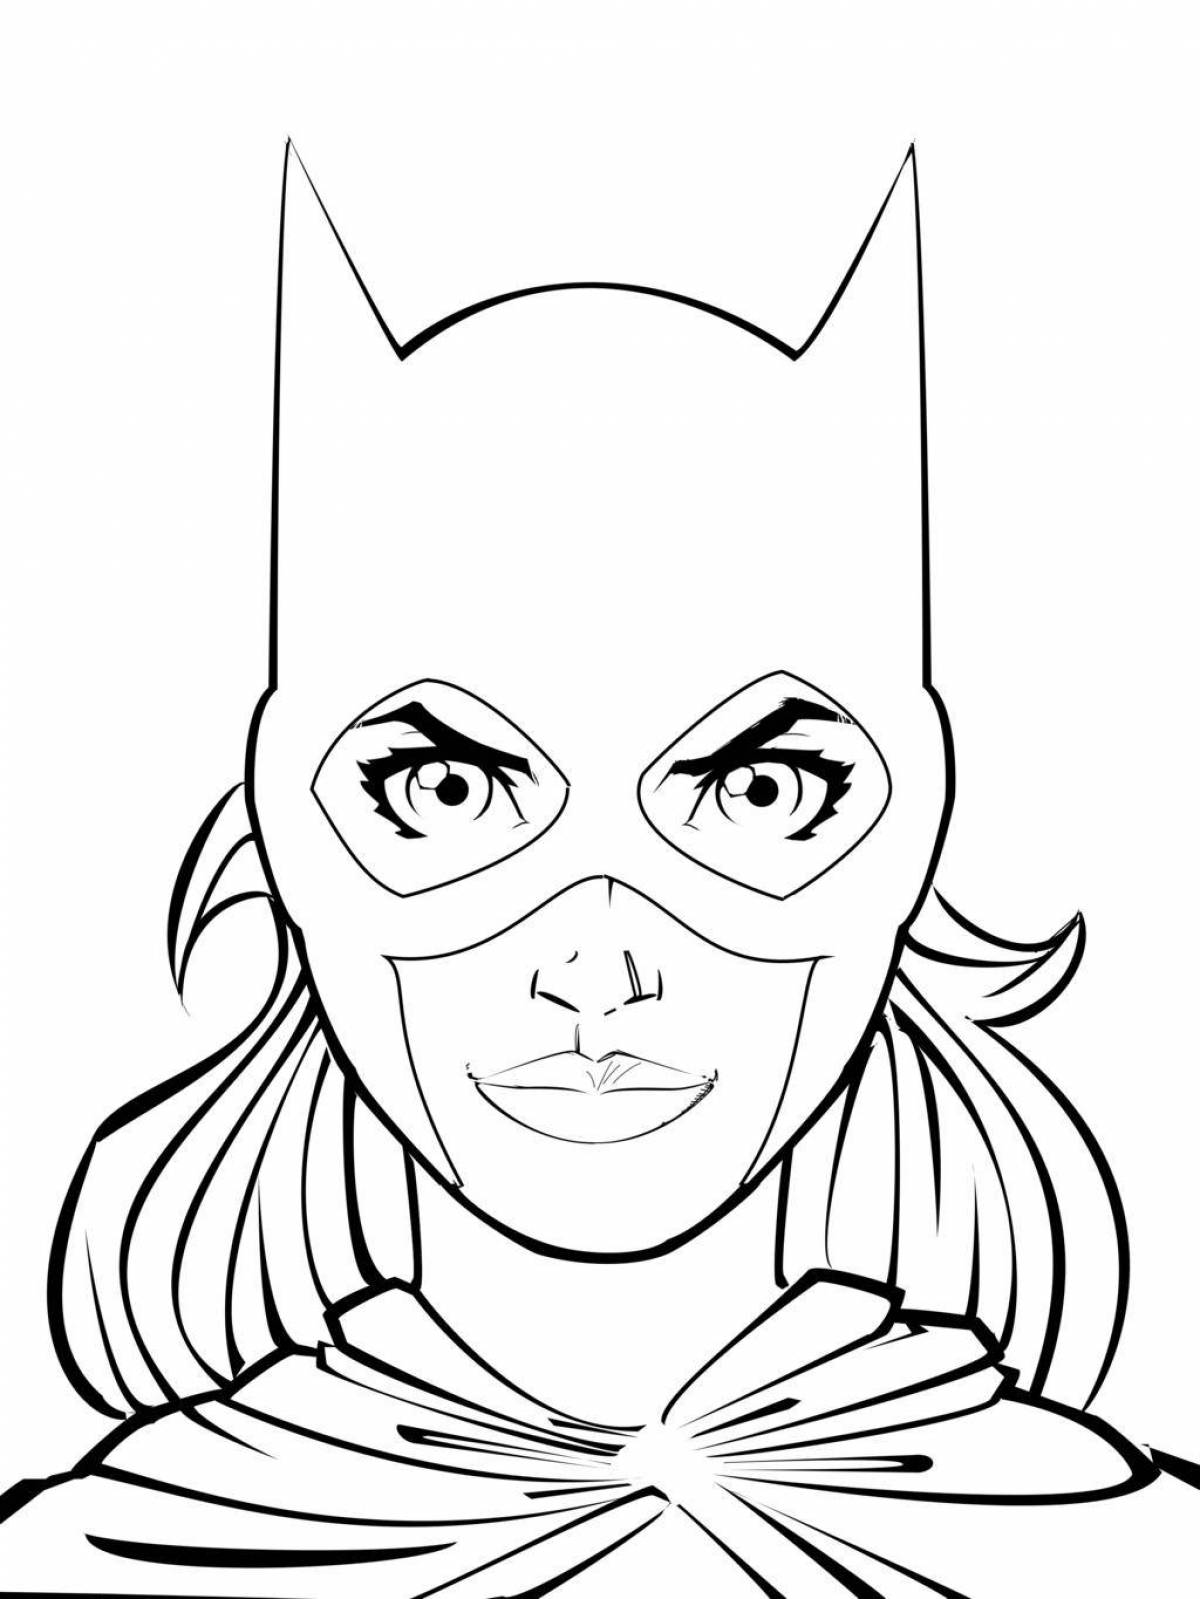 Gorgeous batman and catwoman coloring page